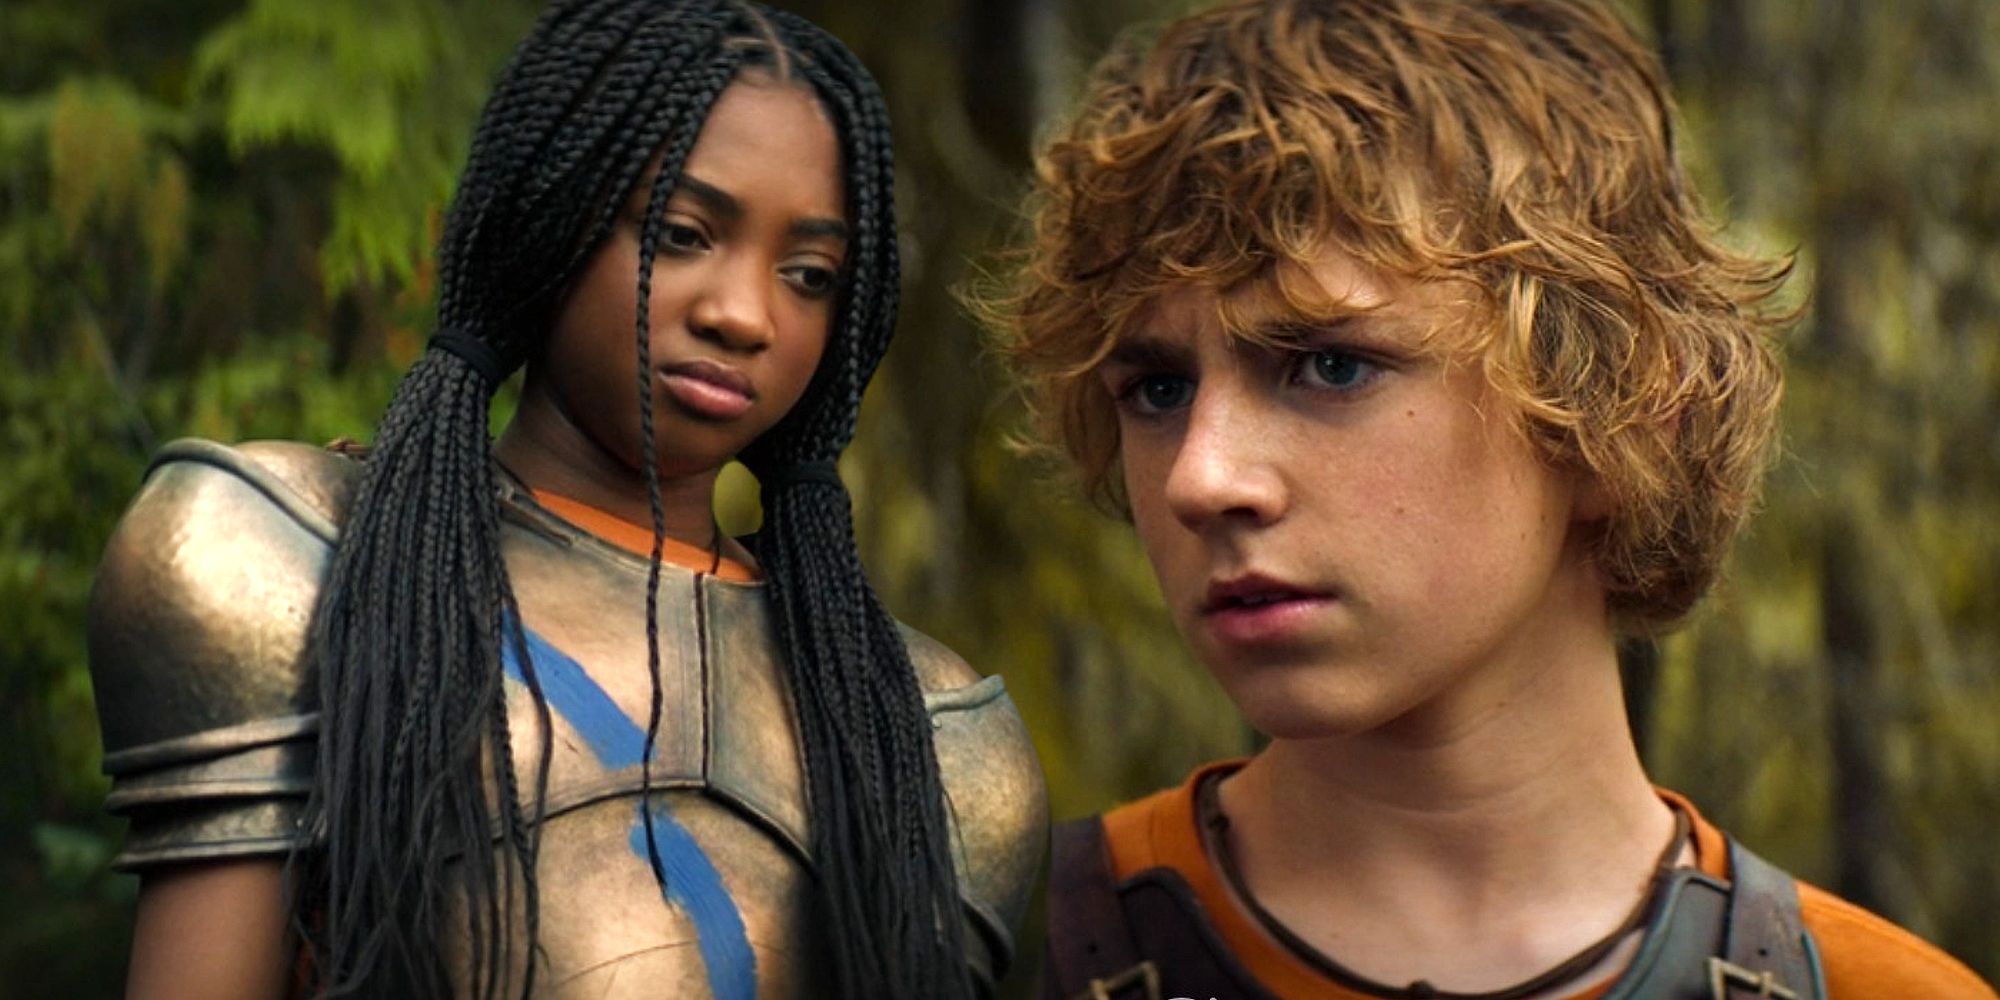 1 Monster In Percy Jackson’s Premiere Reveals Disney Has Way Bigger Plans For The Show’s Future Than We Thought